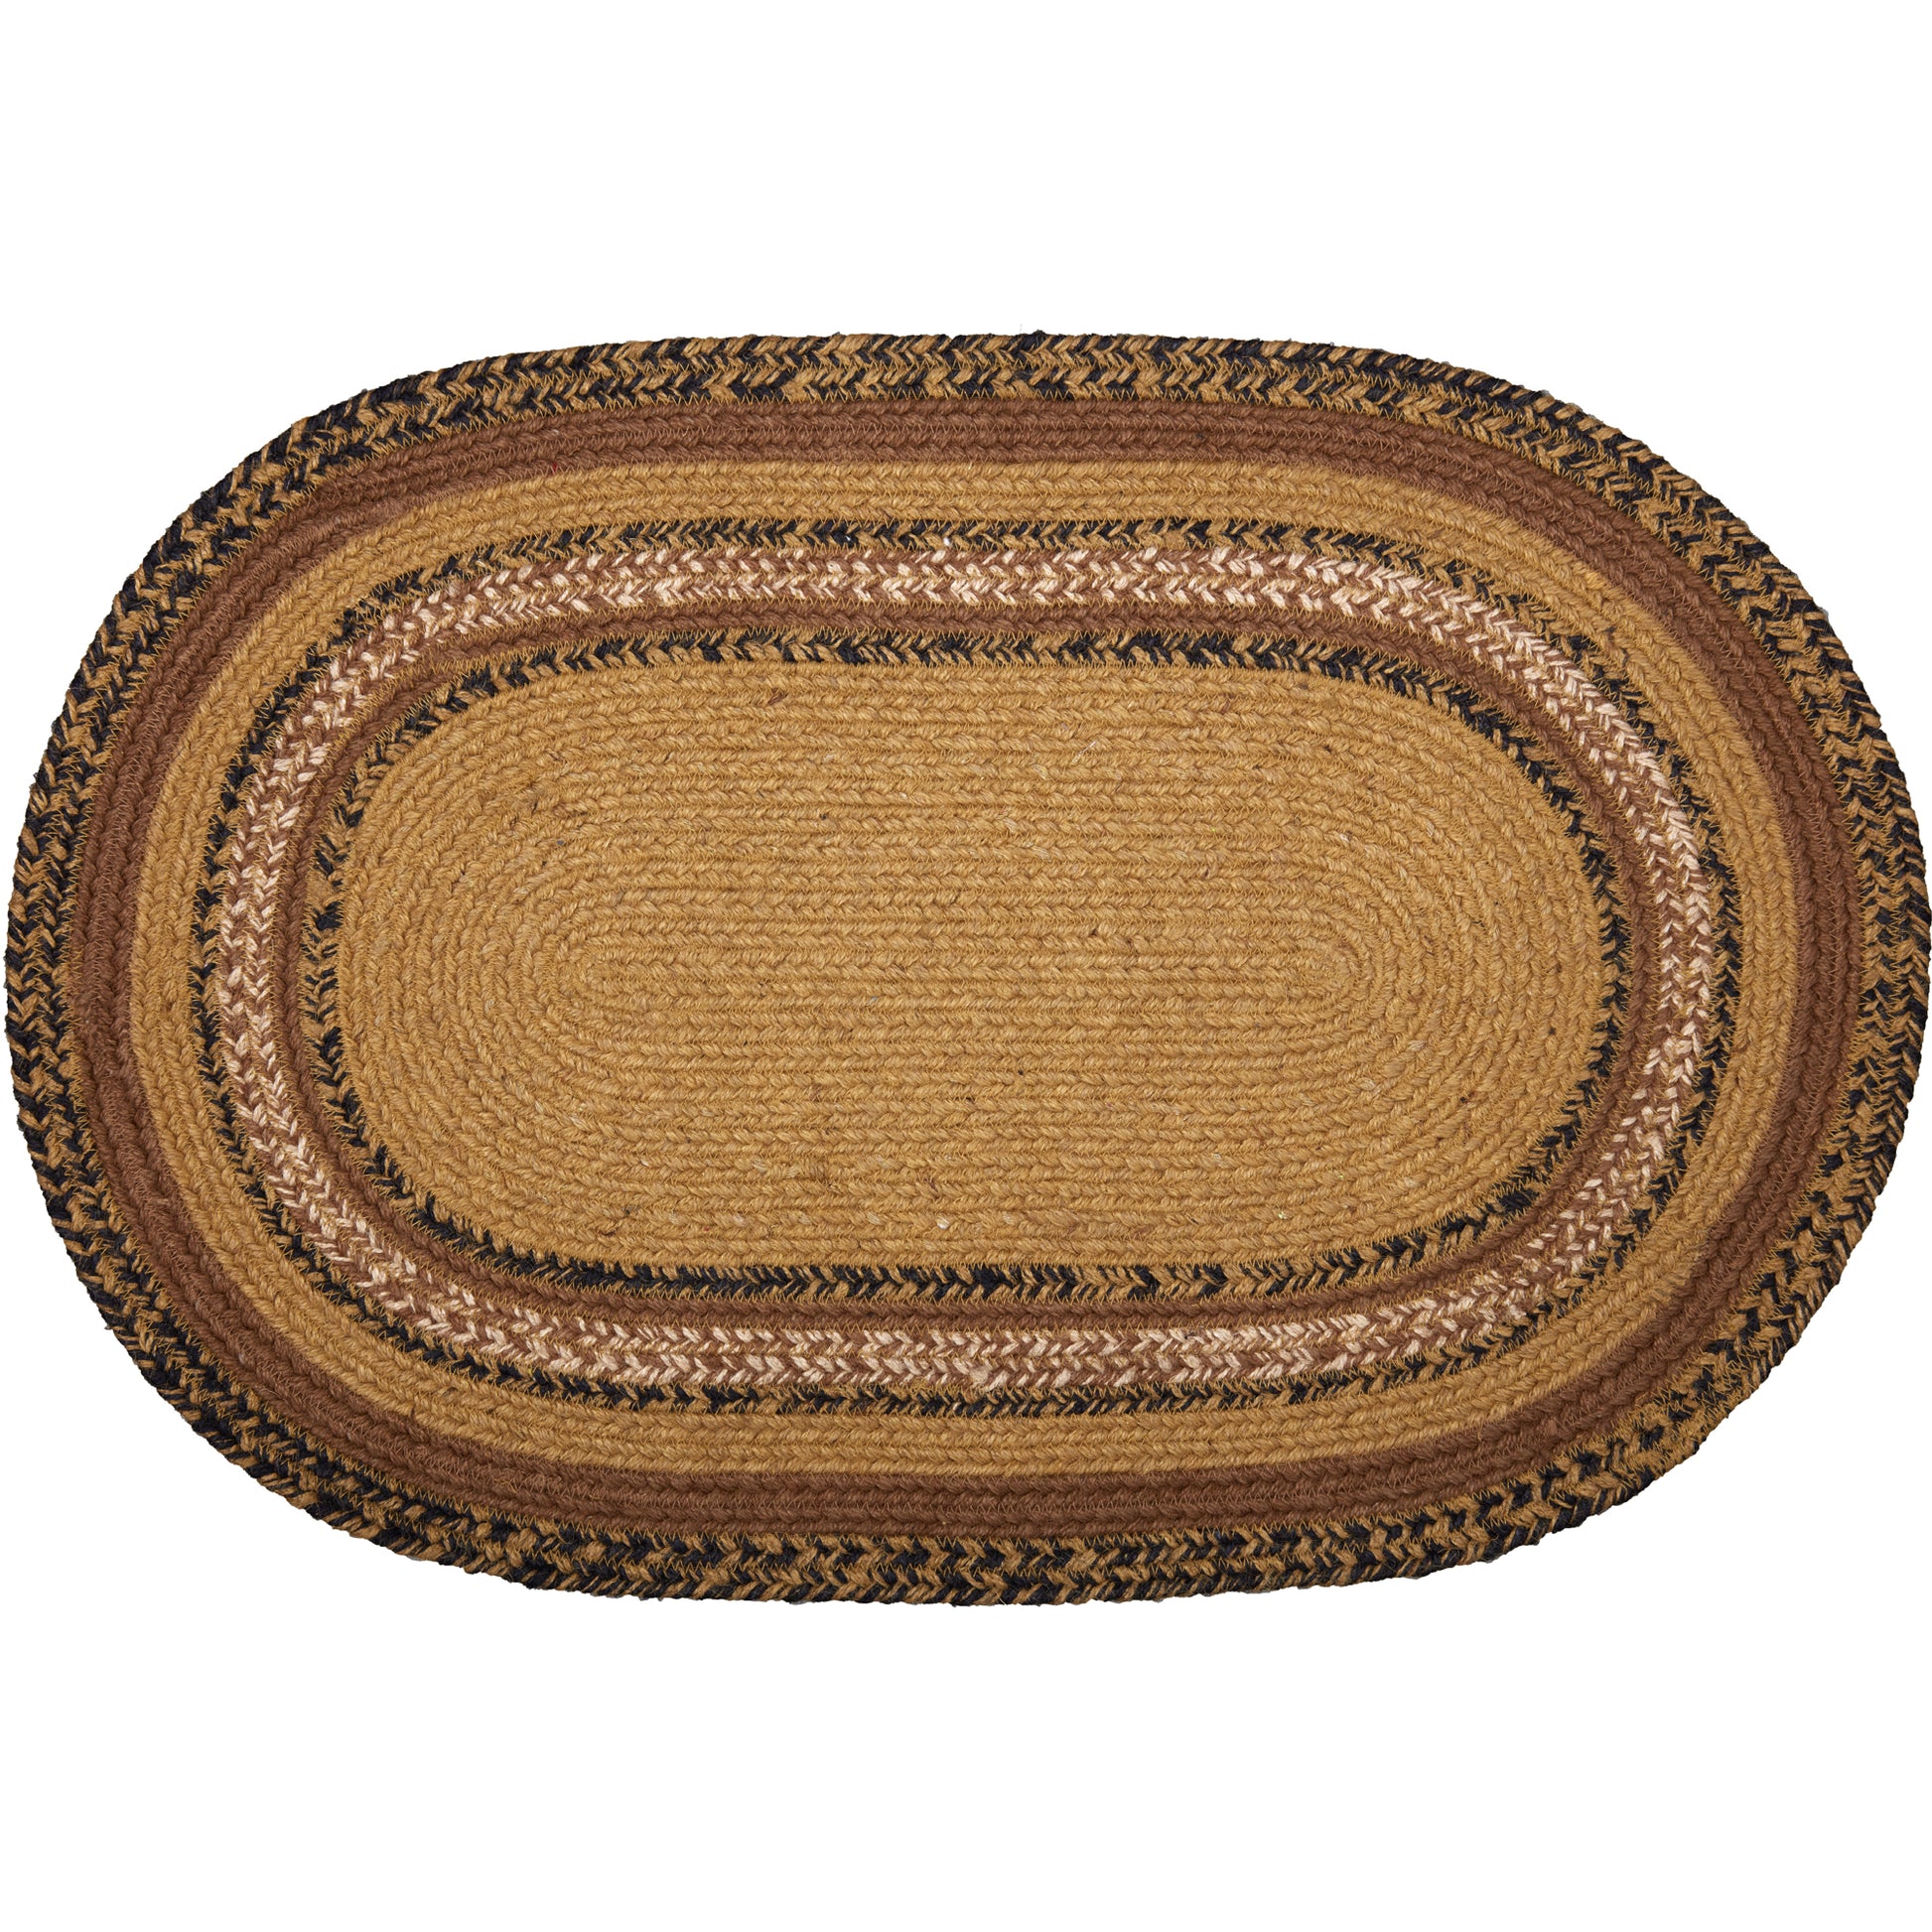 69792-Kettle-Grove-Jute-Rug-Oval-Stencil-Welcome-w-Pad-20x30-image-2